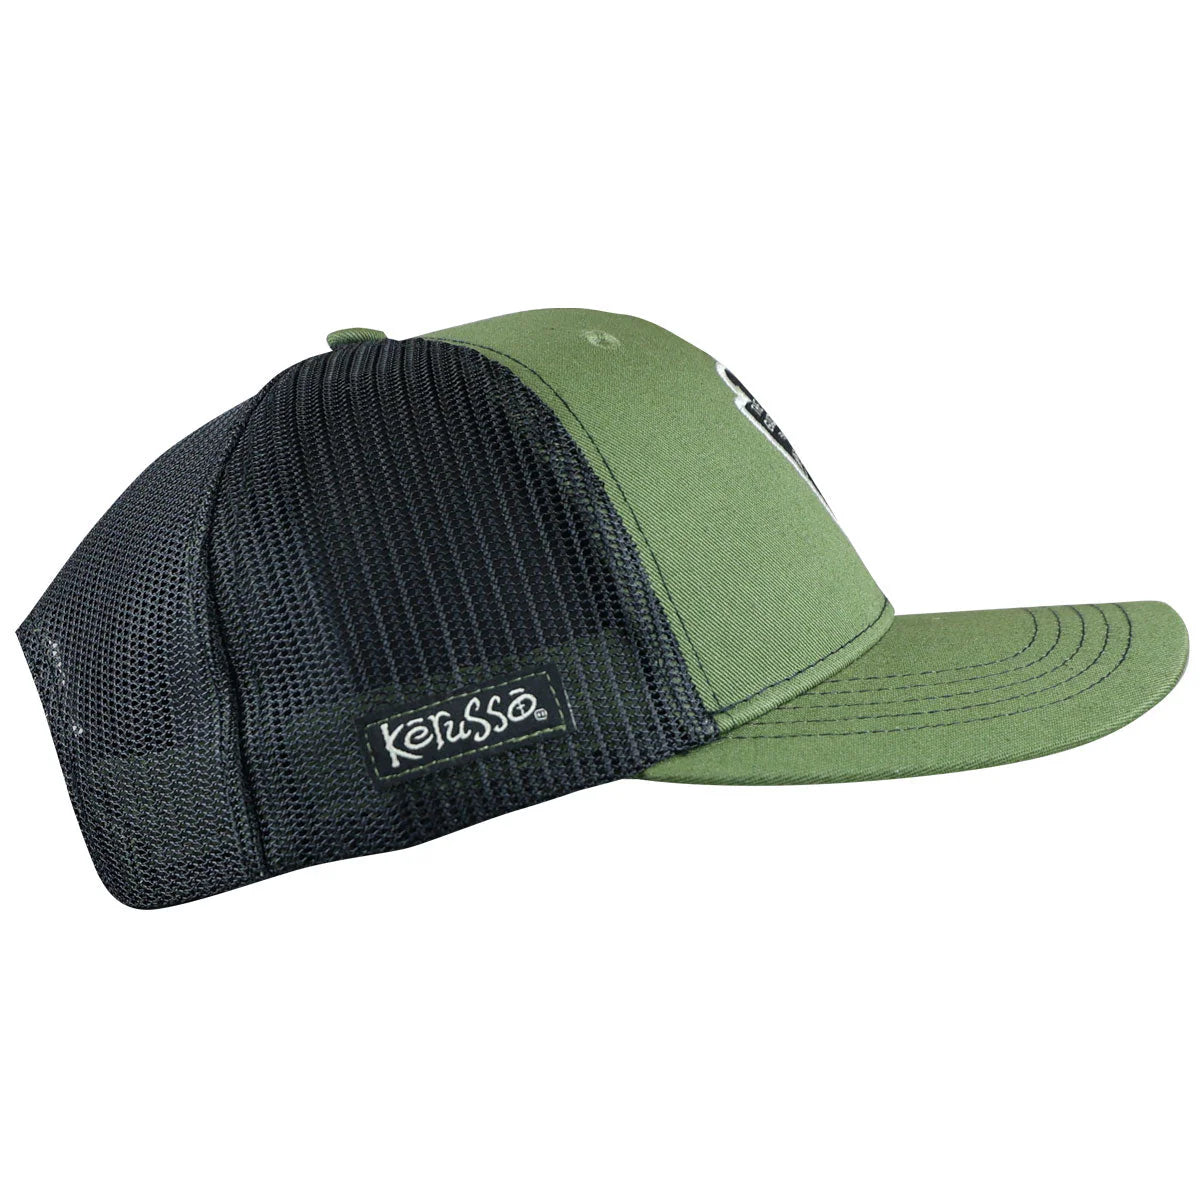 Kerusso Mens Cap Almighty Guide Service Kerusso® Apparel Hats Hats / Beanies Mens